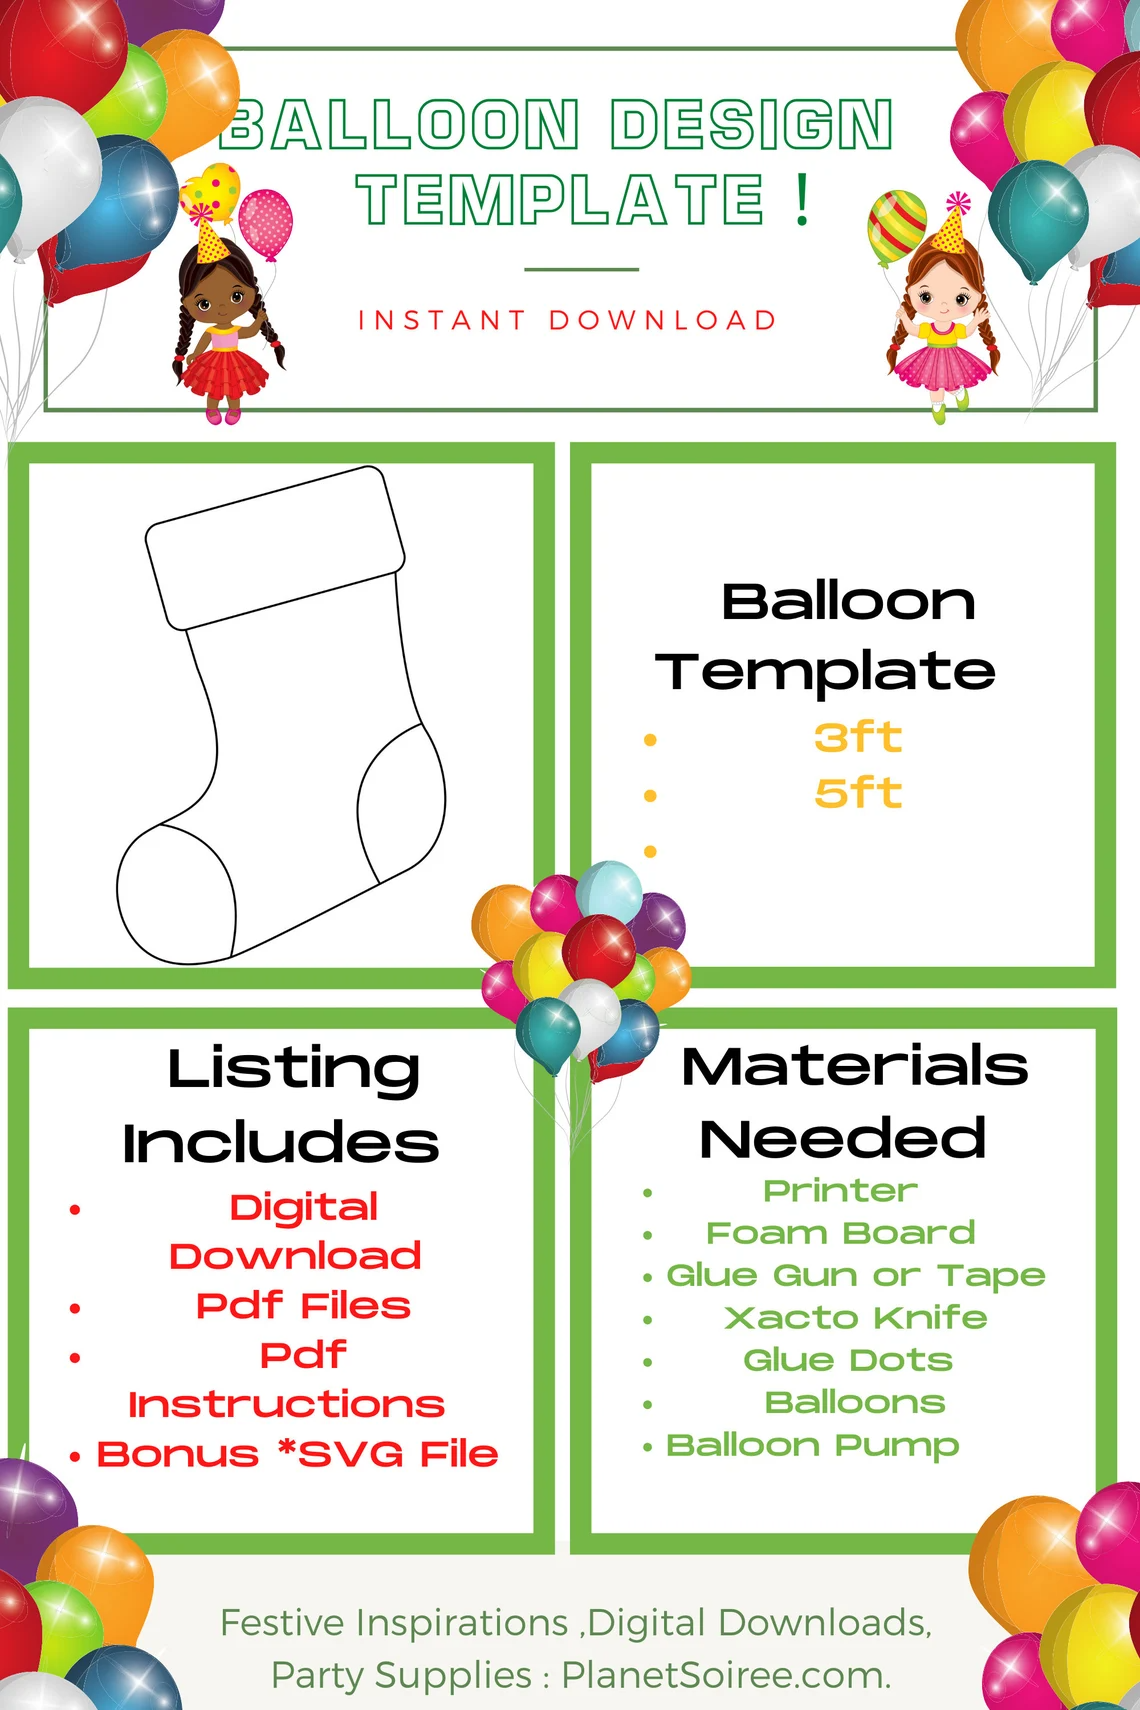 Stocking Balloon Template, Stocking Mosaic from Balloons, Stocking Mosaic, Ballon Mosaic, Digital Design, Instant Download Product